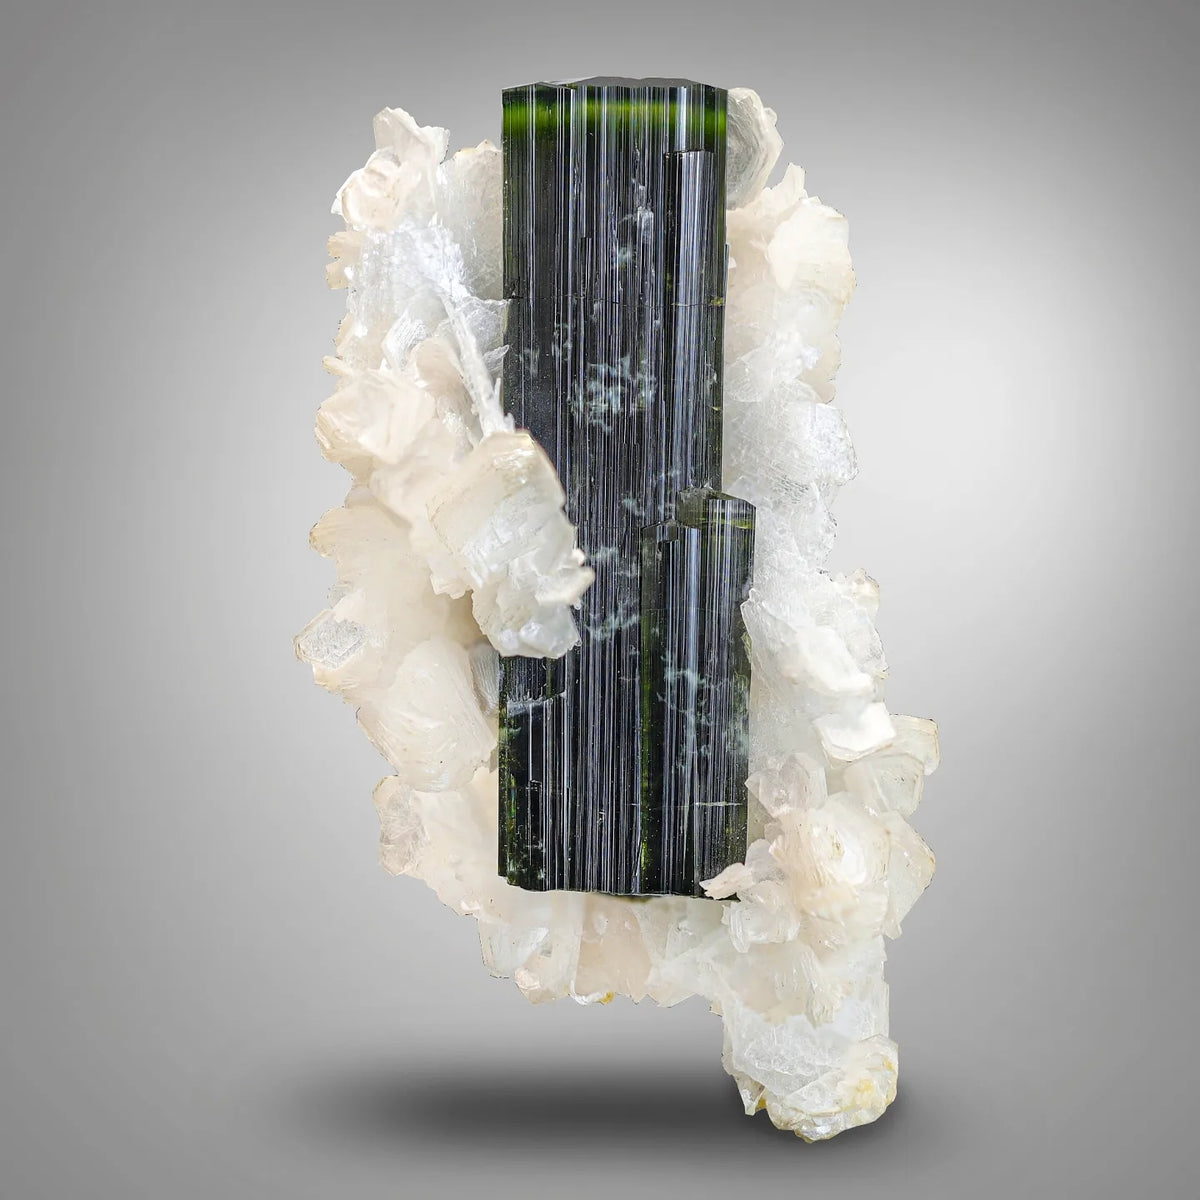 Buy Lustrous Green Cap Tourmaline on Albite with Muscovite